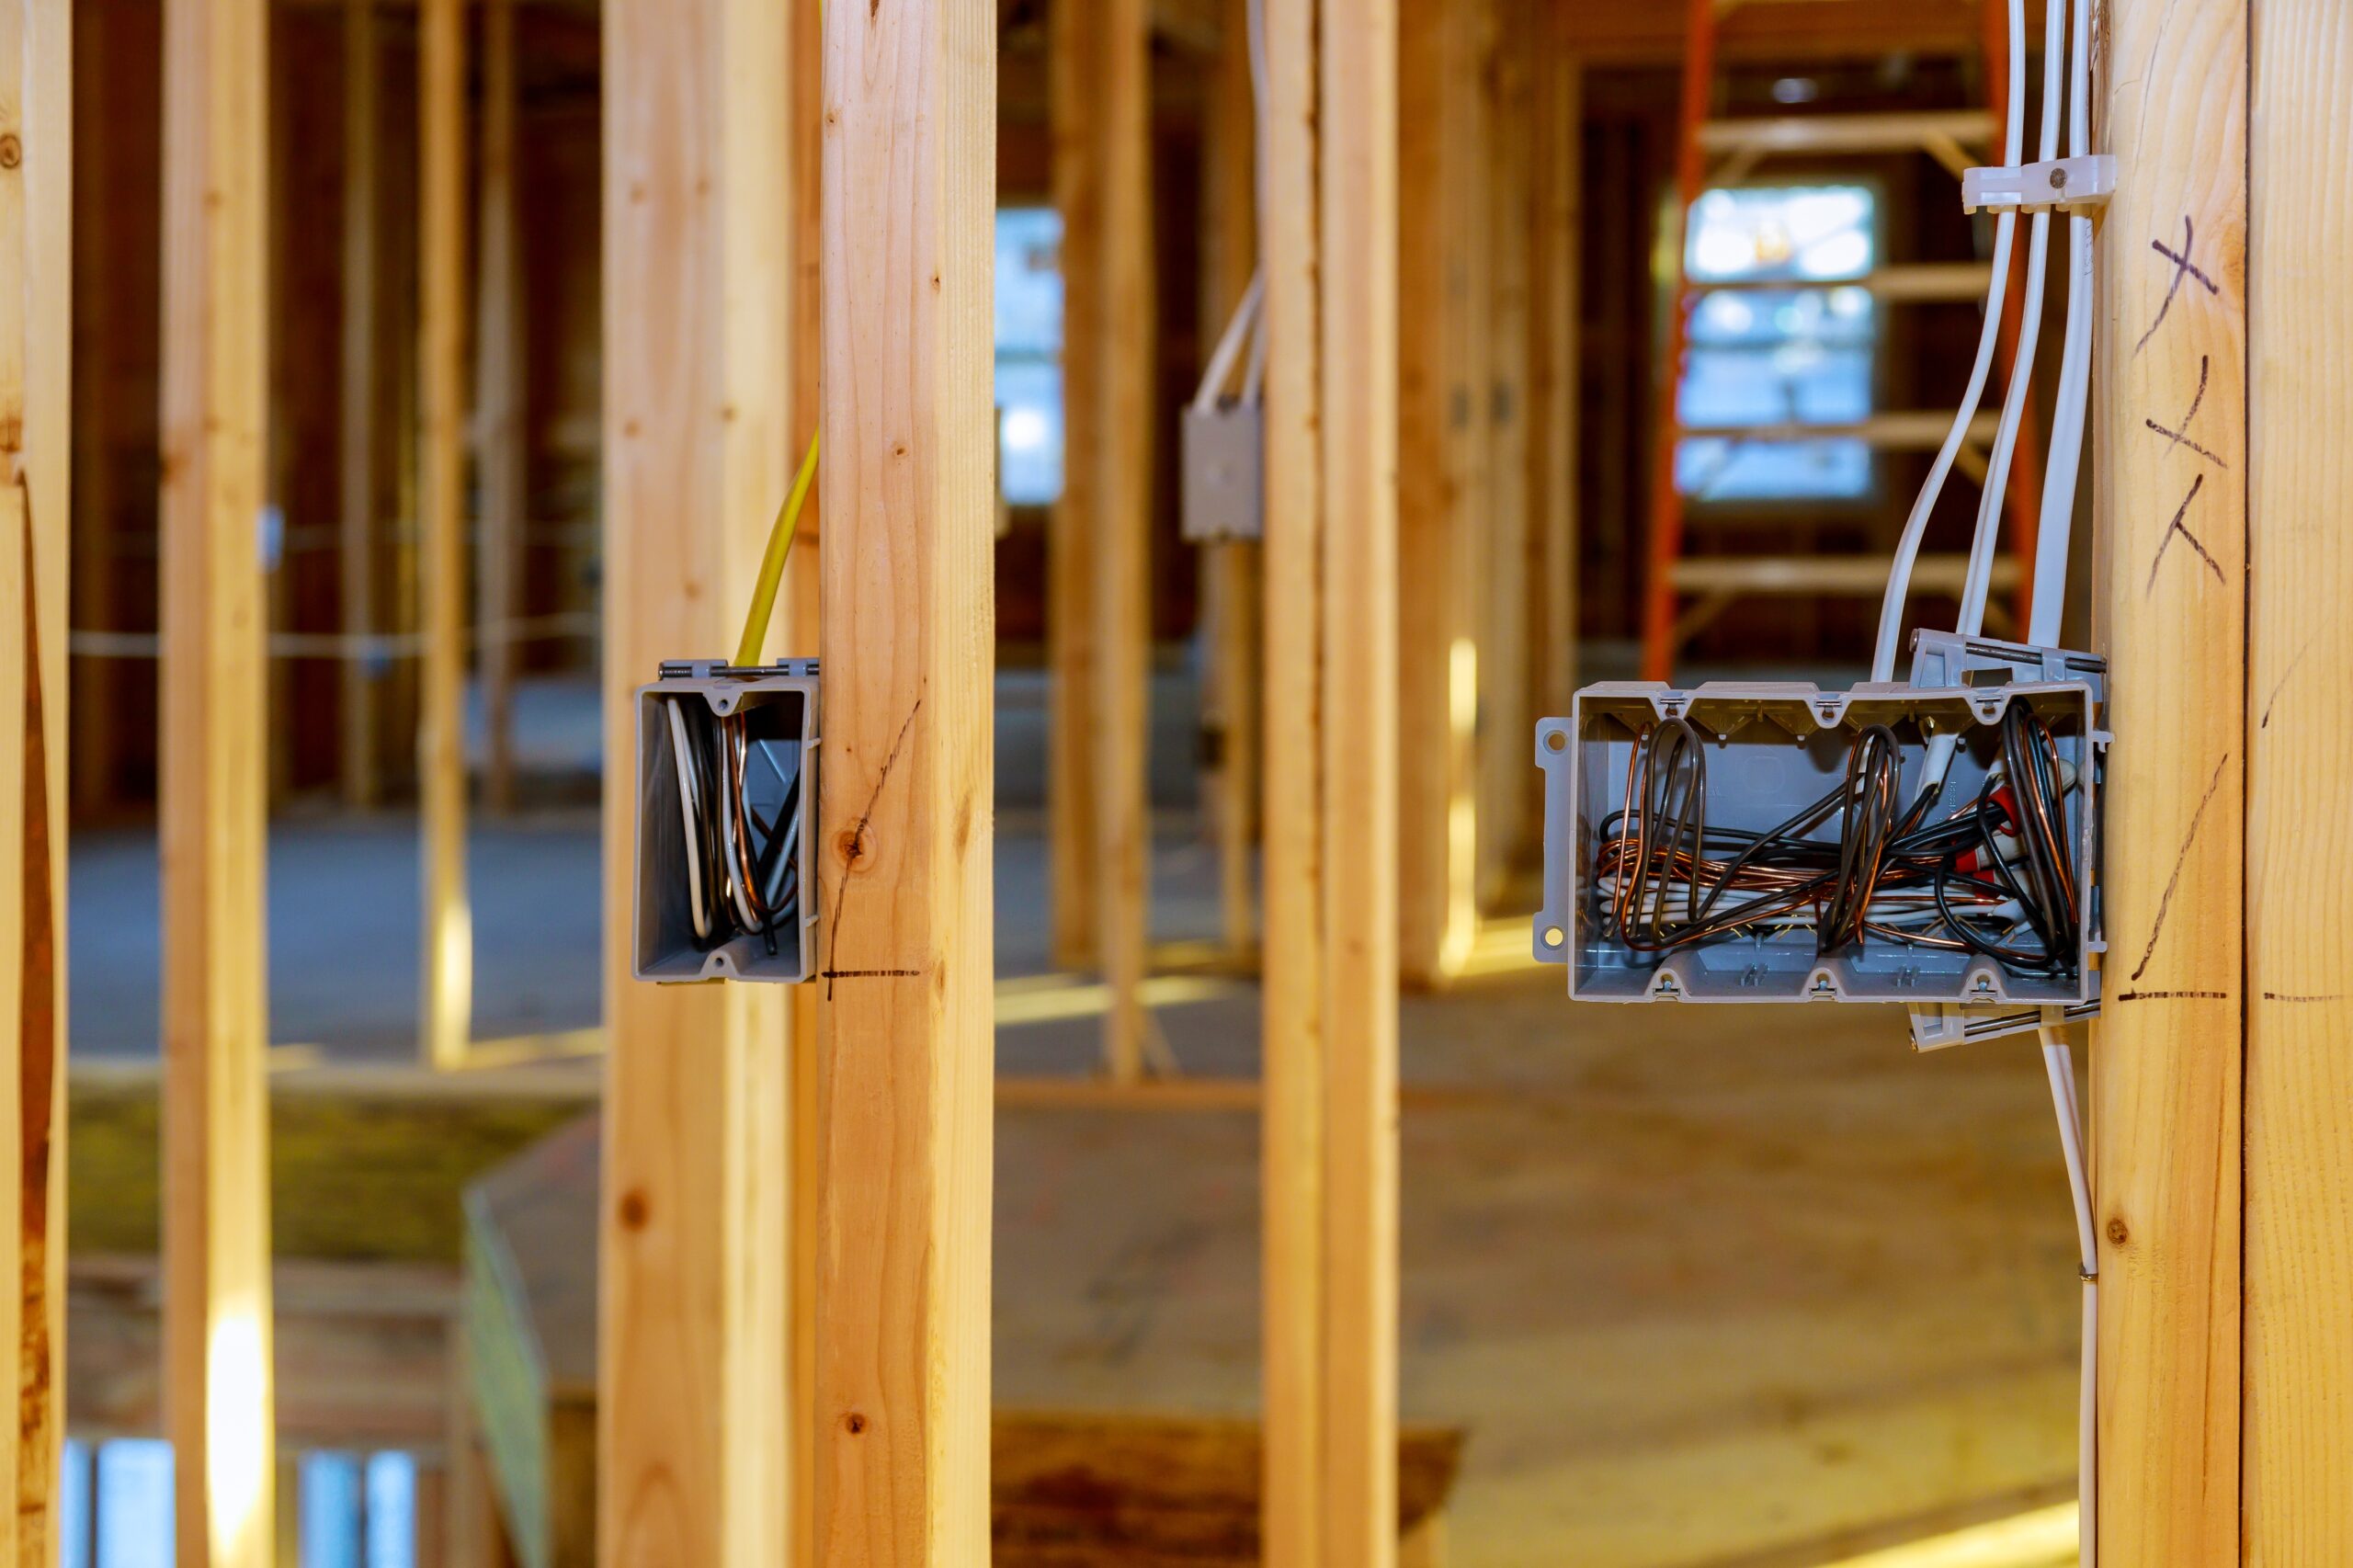 Electrical Socket Boxes With Wires Of Wooden Beams